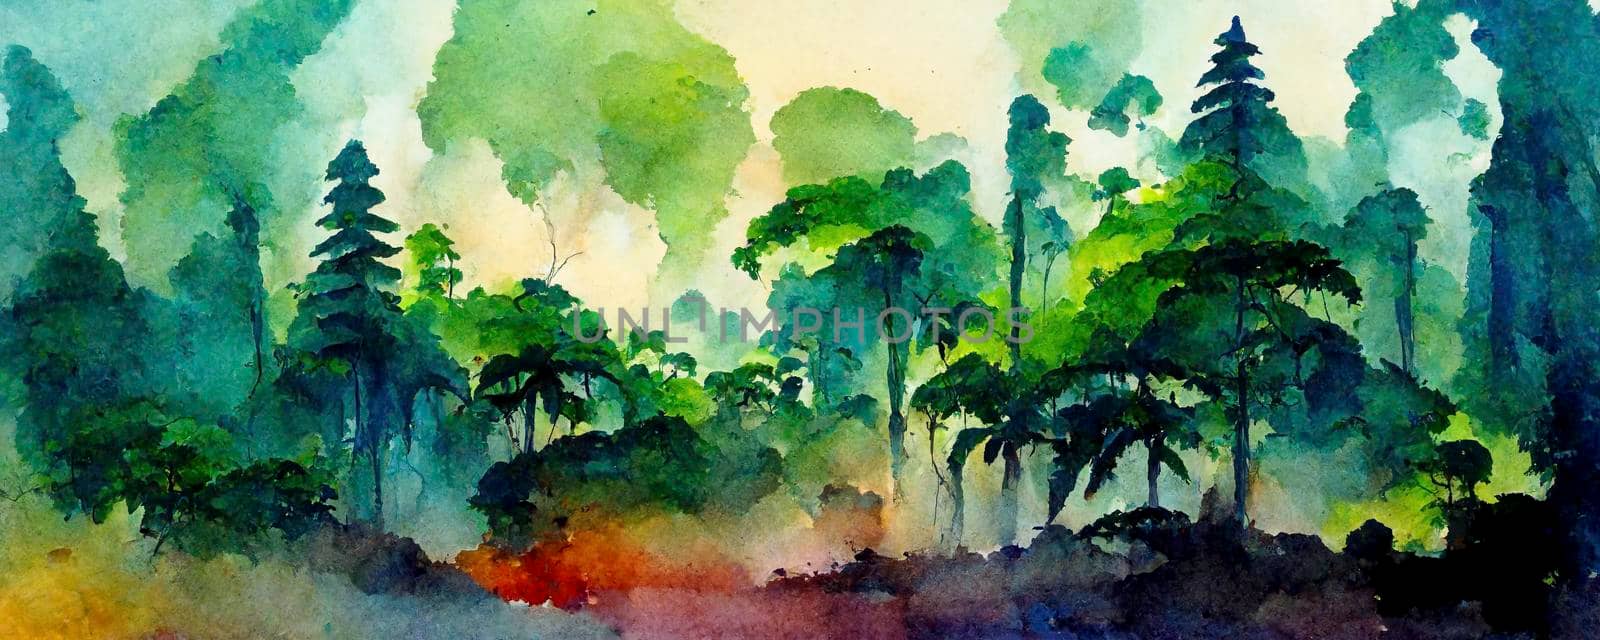 Digital structure of painting. Watercolor landscape in the fores. by jbruiz78